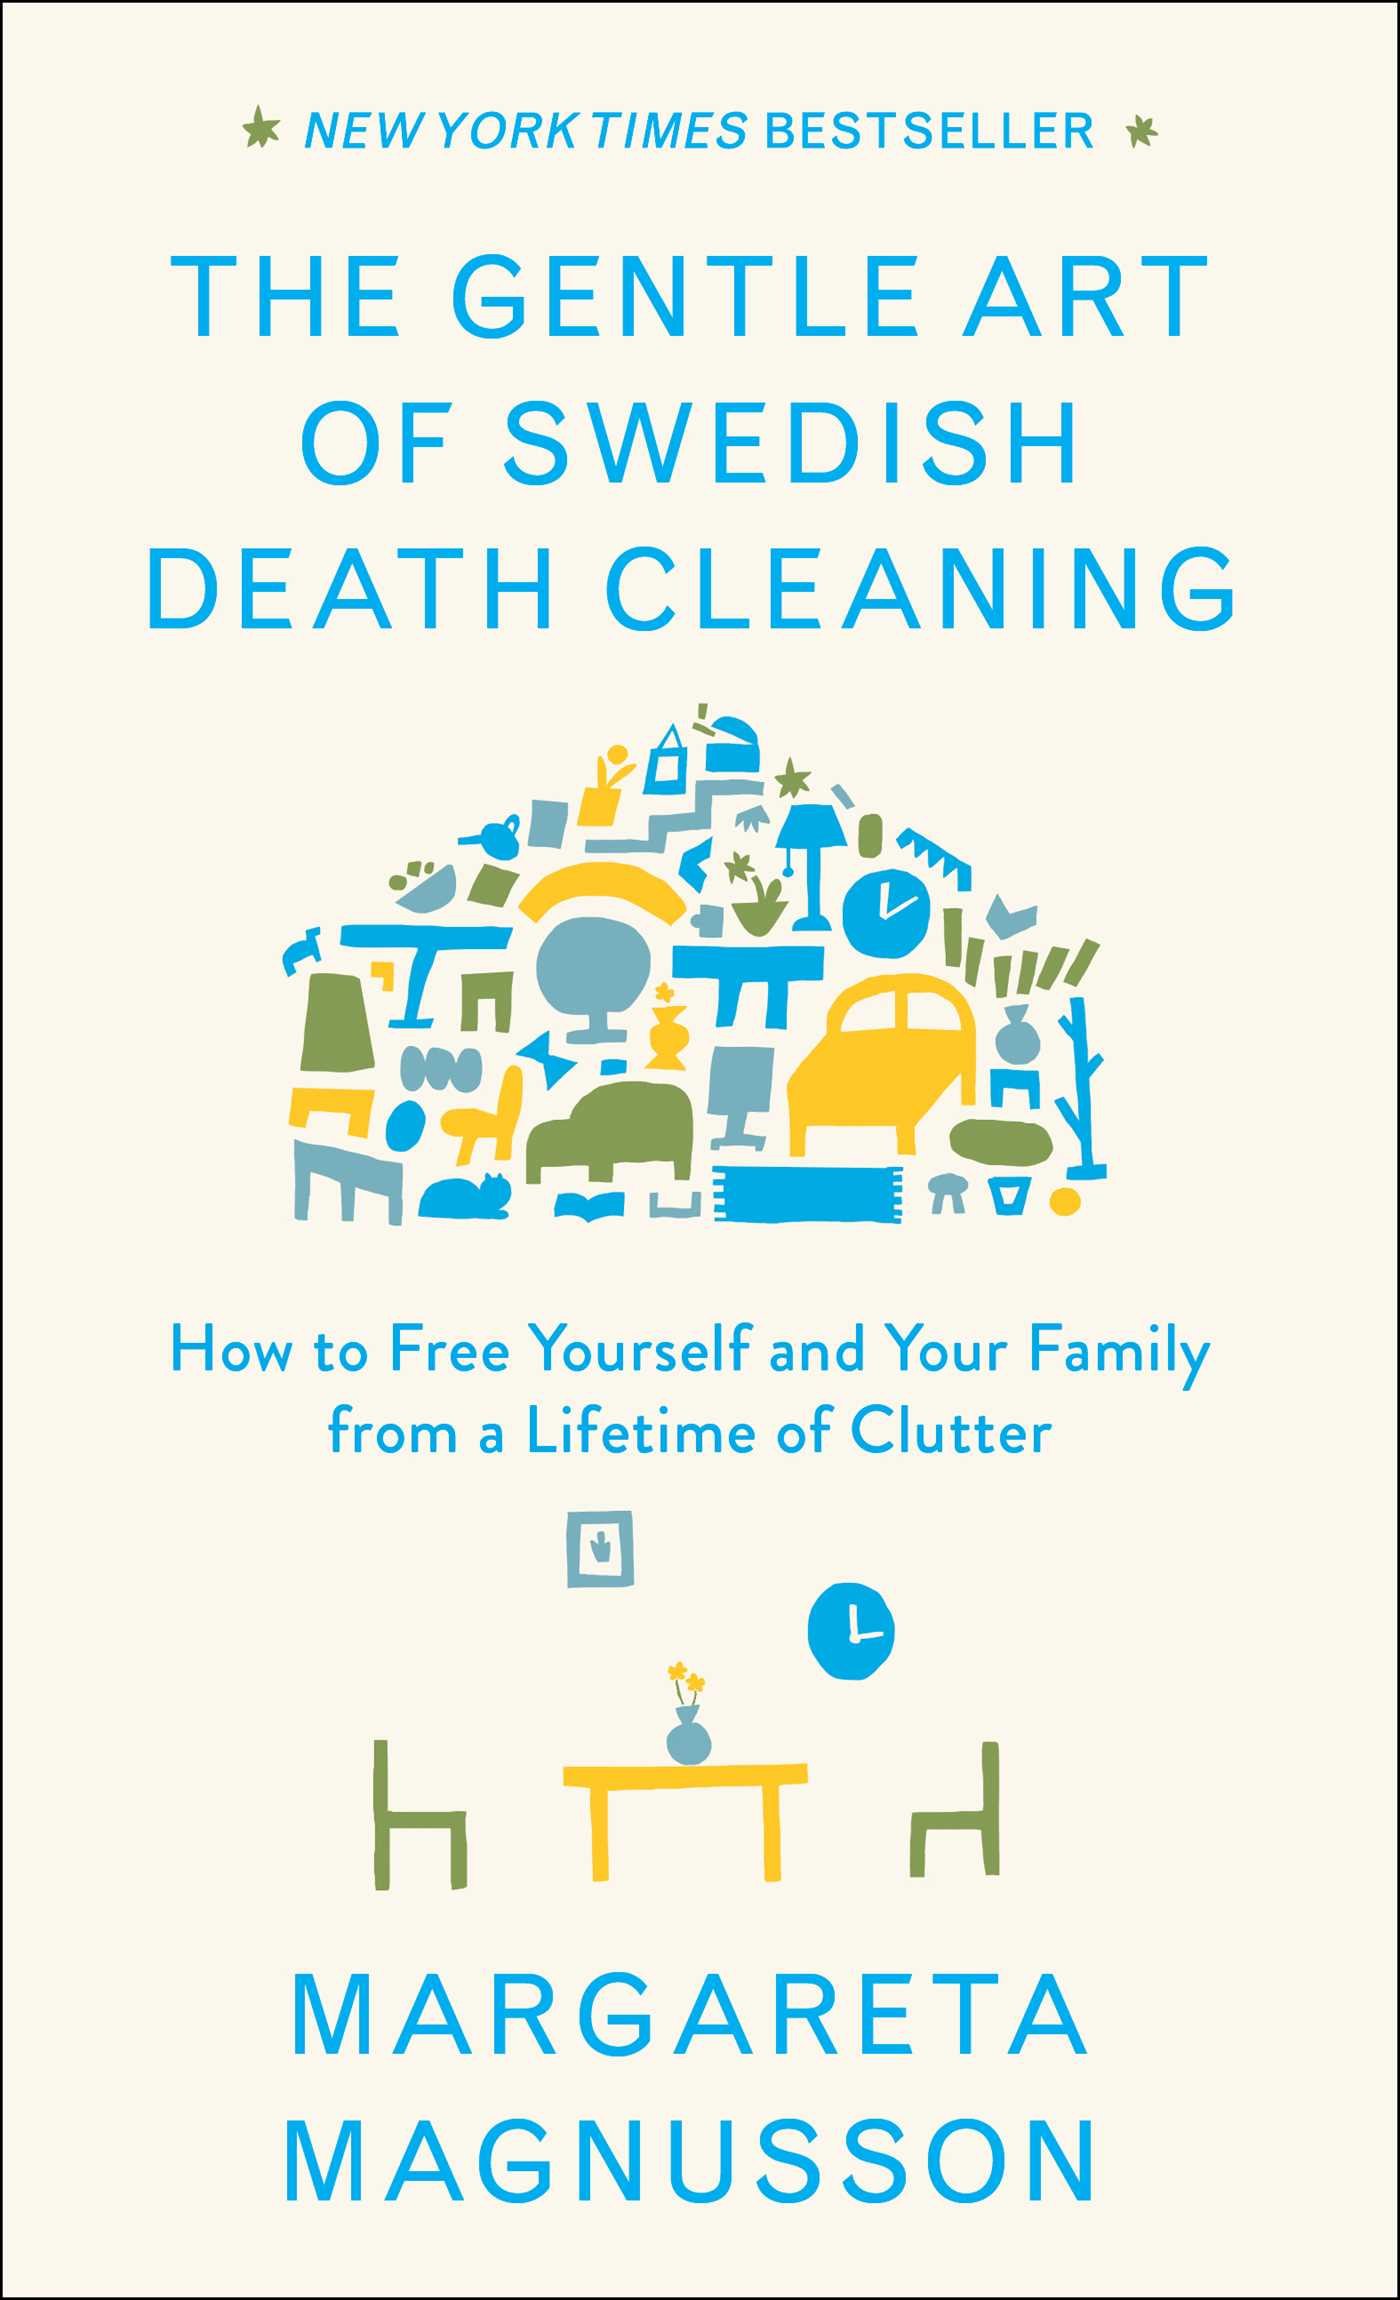 Death Cleaning: Whatever you call it, you’ll be glad you did it